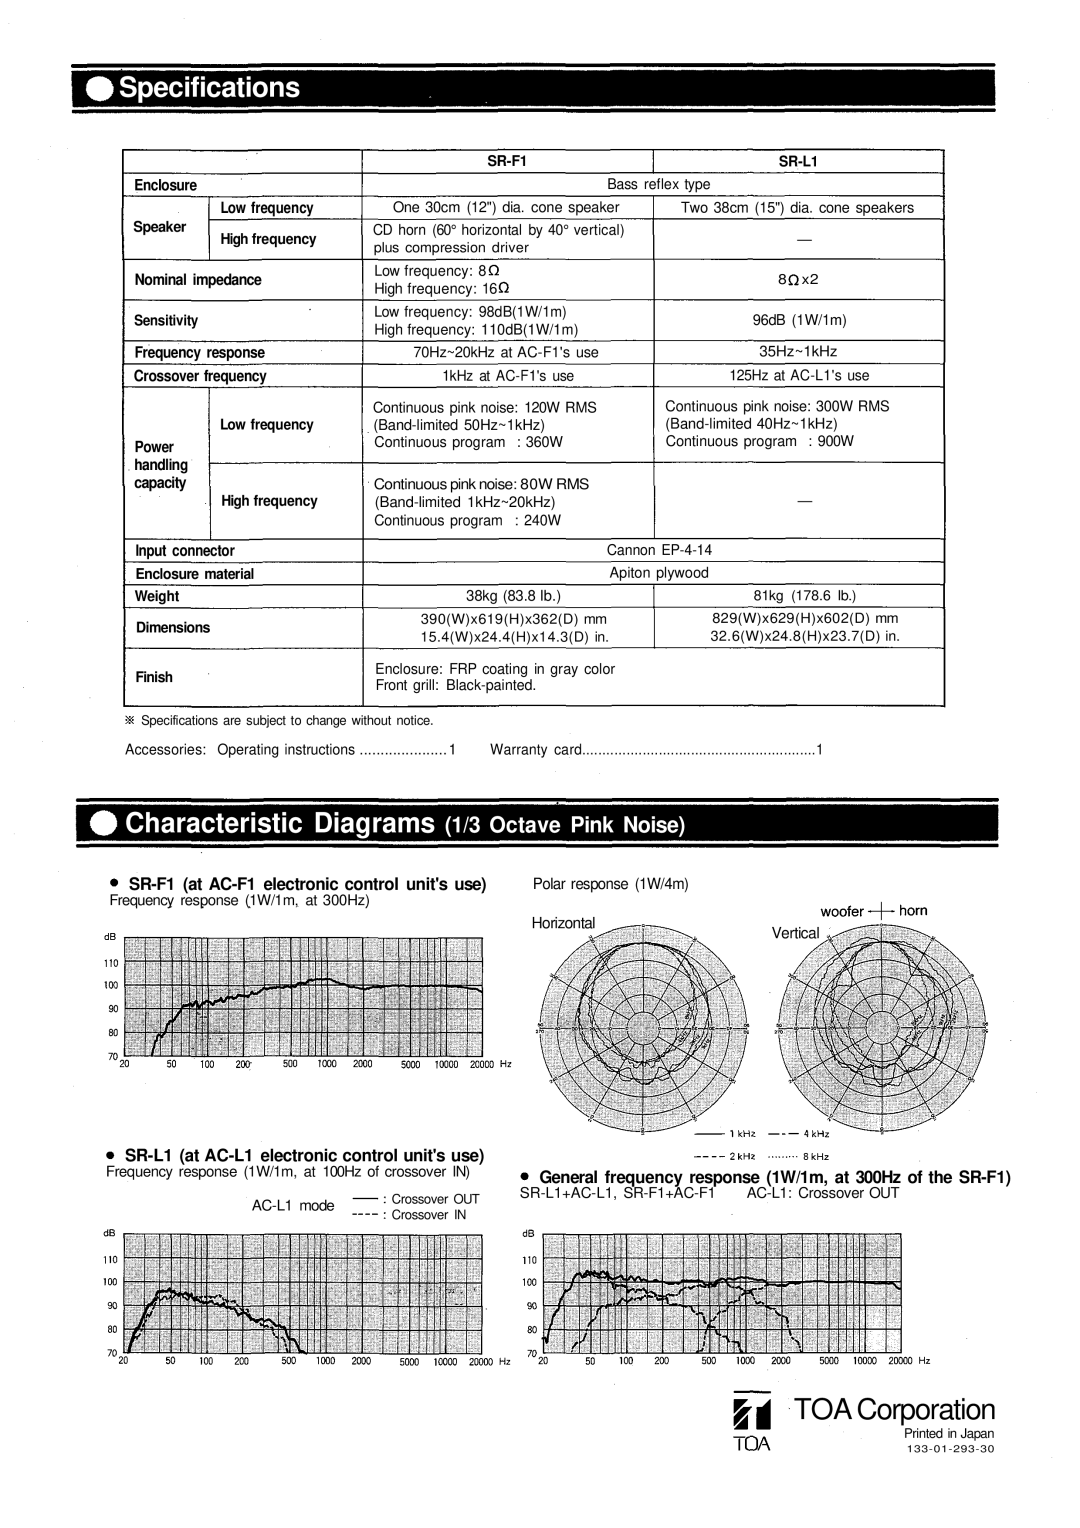 Vizio SR-F1 manual Specifications, Characteristic Diagrams 1/3 Octave Pink Noise, TOA Corporation, Weight Dimensions Finish 